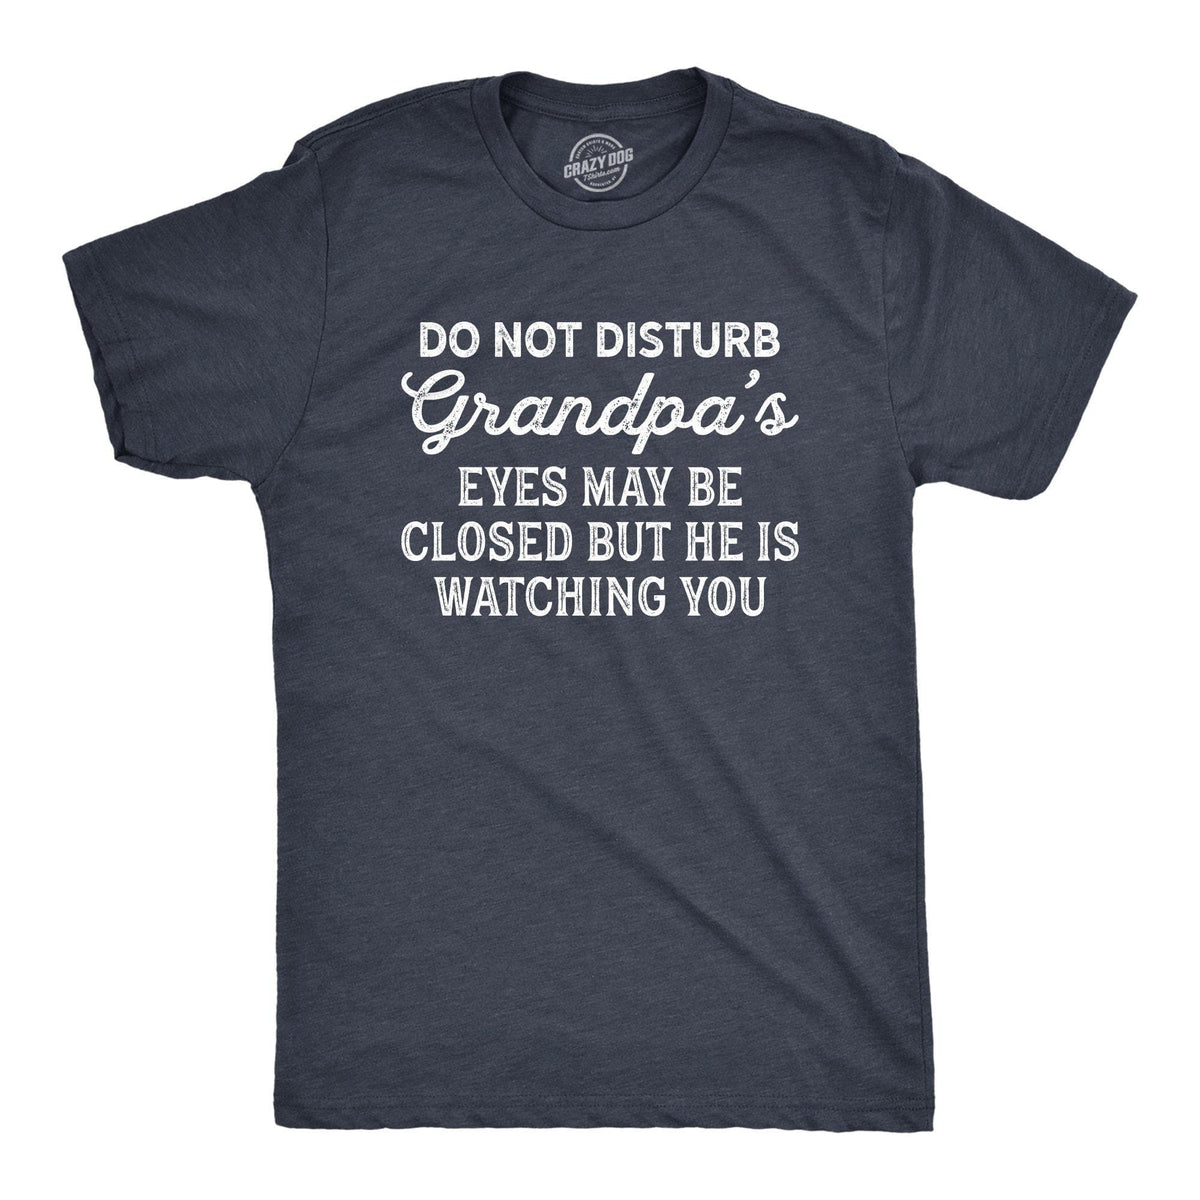 Do Not Disturb Grandpa&#39;s Eyes May Be Closed But He Is Watching You Men&#39;s Tshirt - Crazy Dog T-Shirts